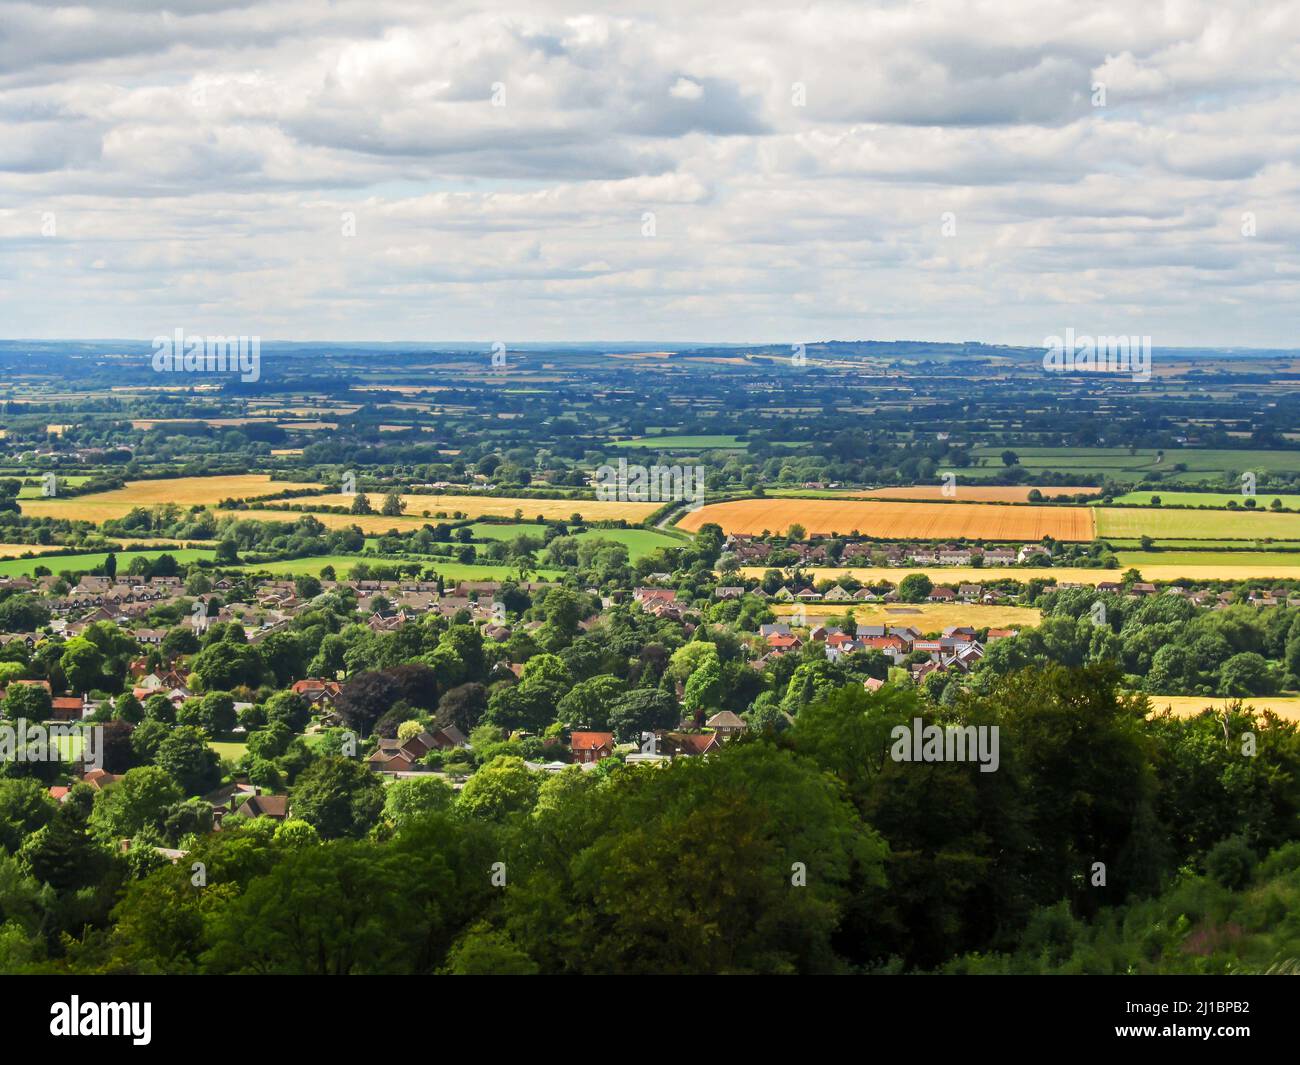 View over small villages and farms of Rural England, as seen from the escarpment of the Chiltern Hills, Southern UK Stock Photo